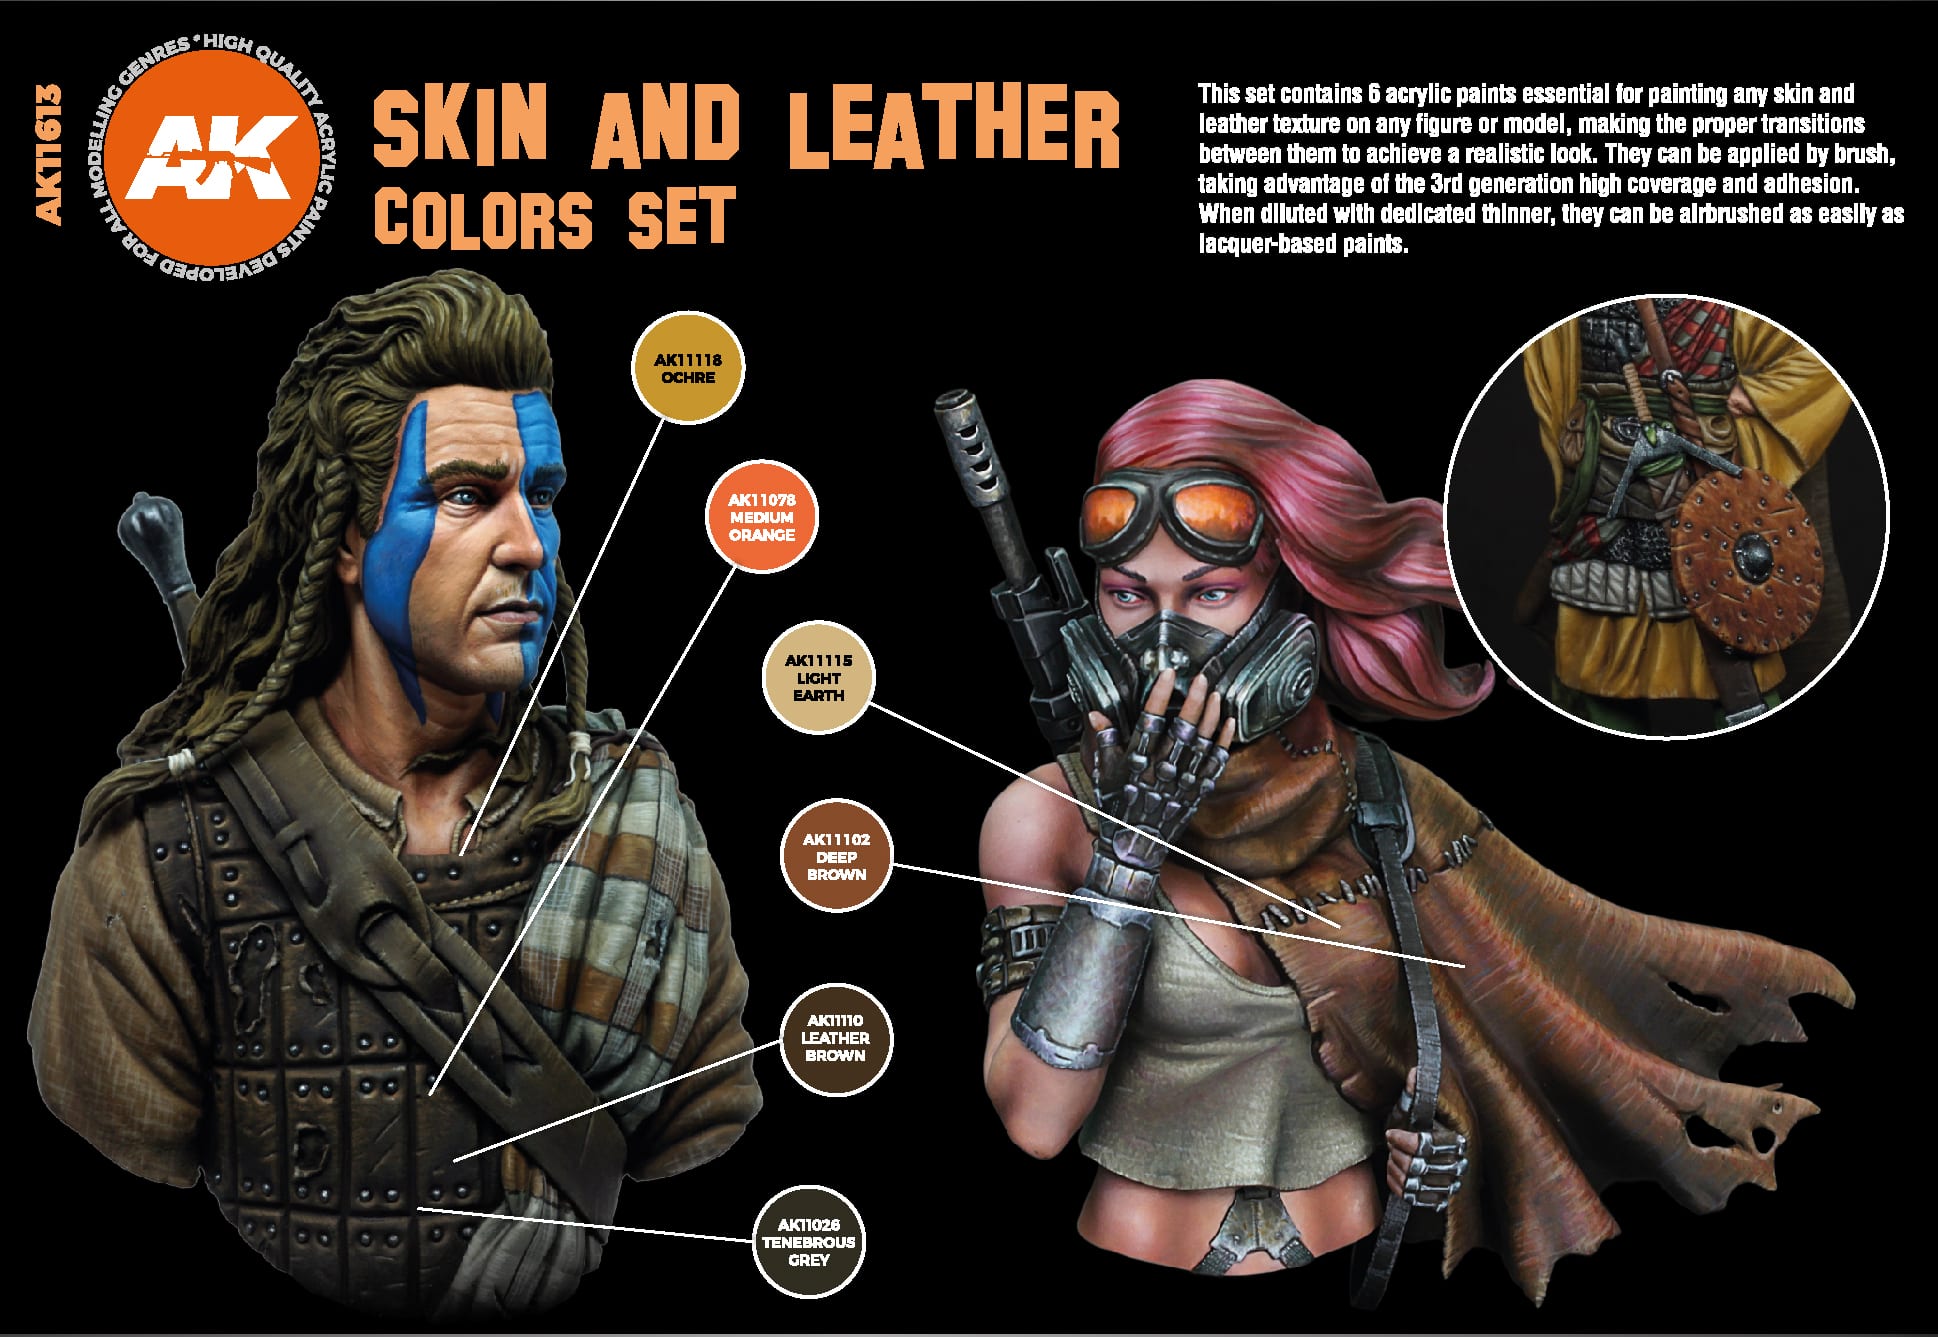 Buy SKIN AND LEATHER COLORS SET online for 16,50€